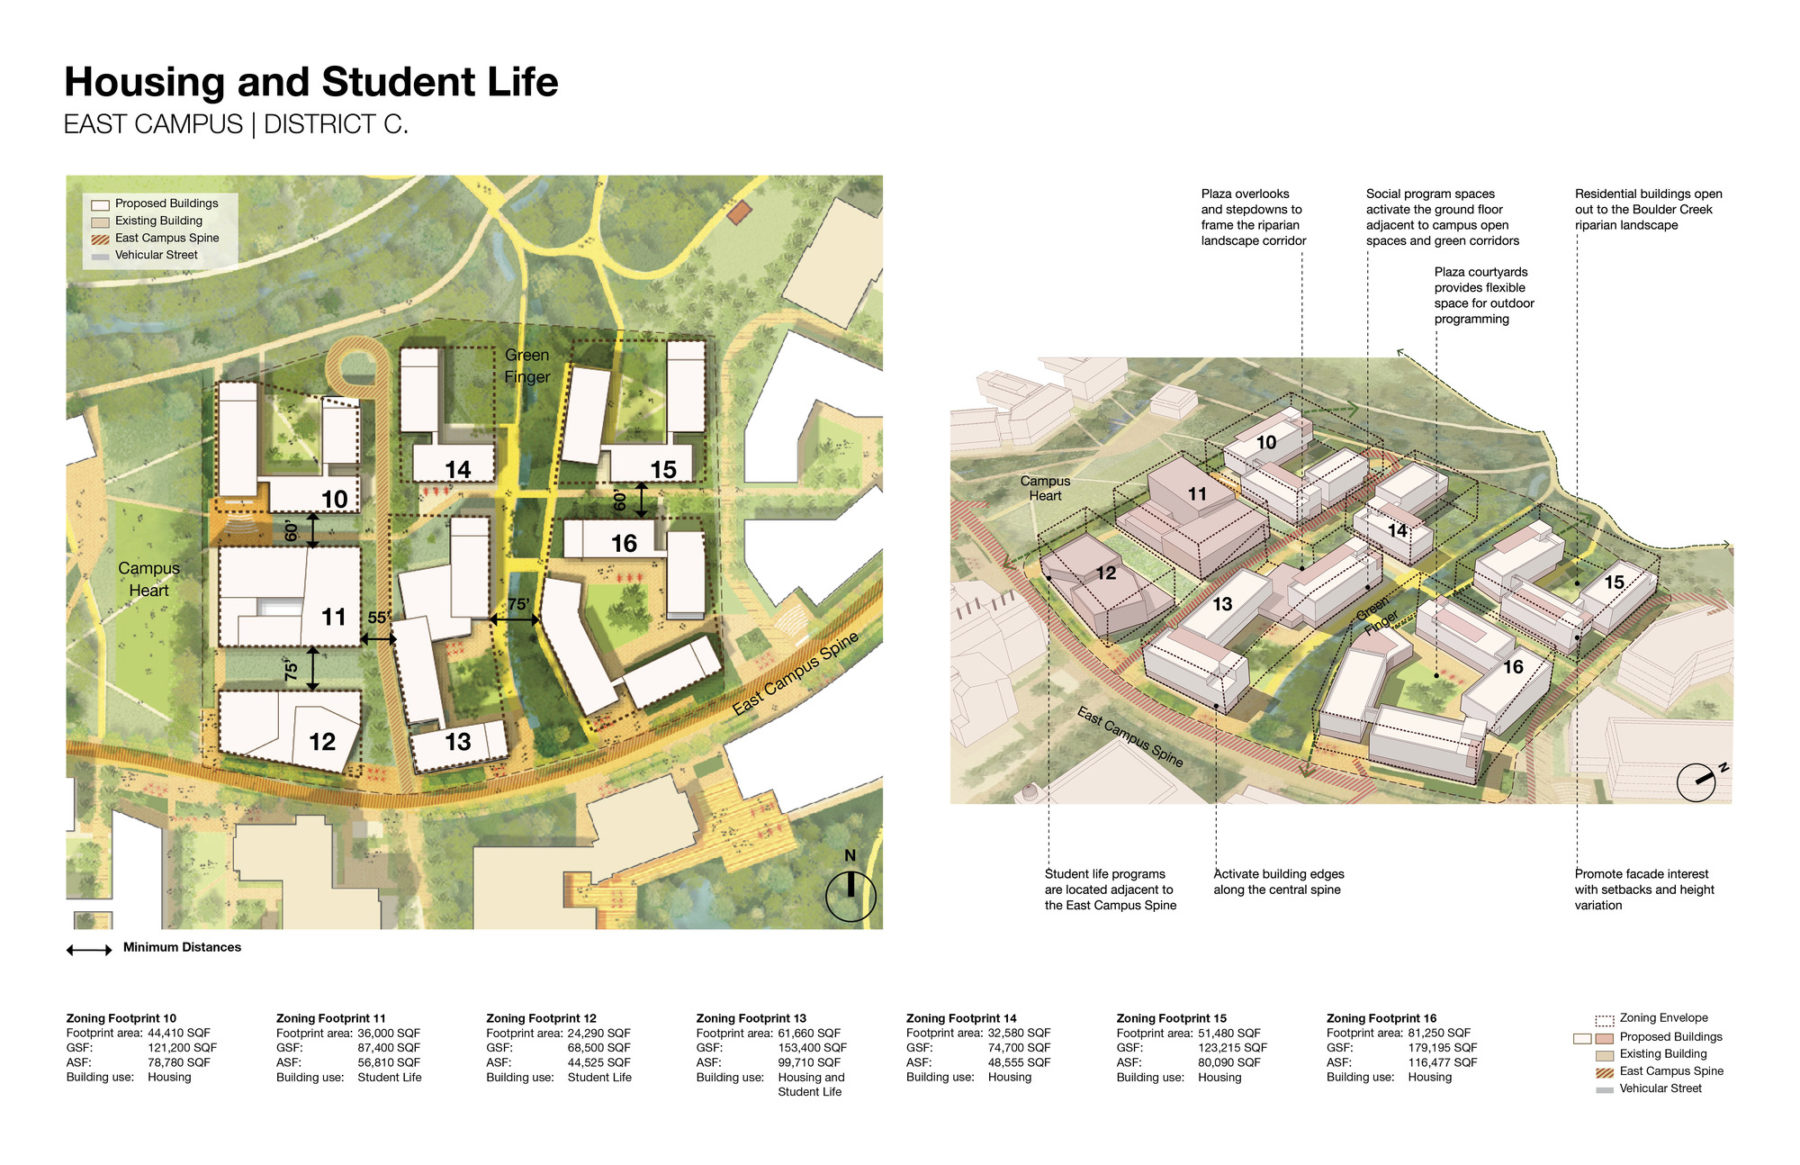 annotated plan and axon drawings with housing and student life design guidelines